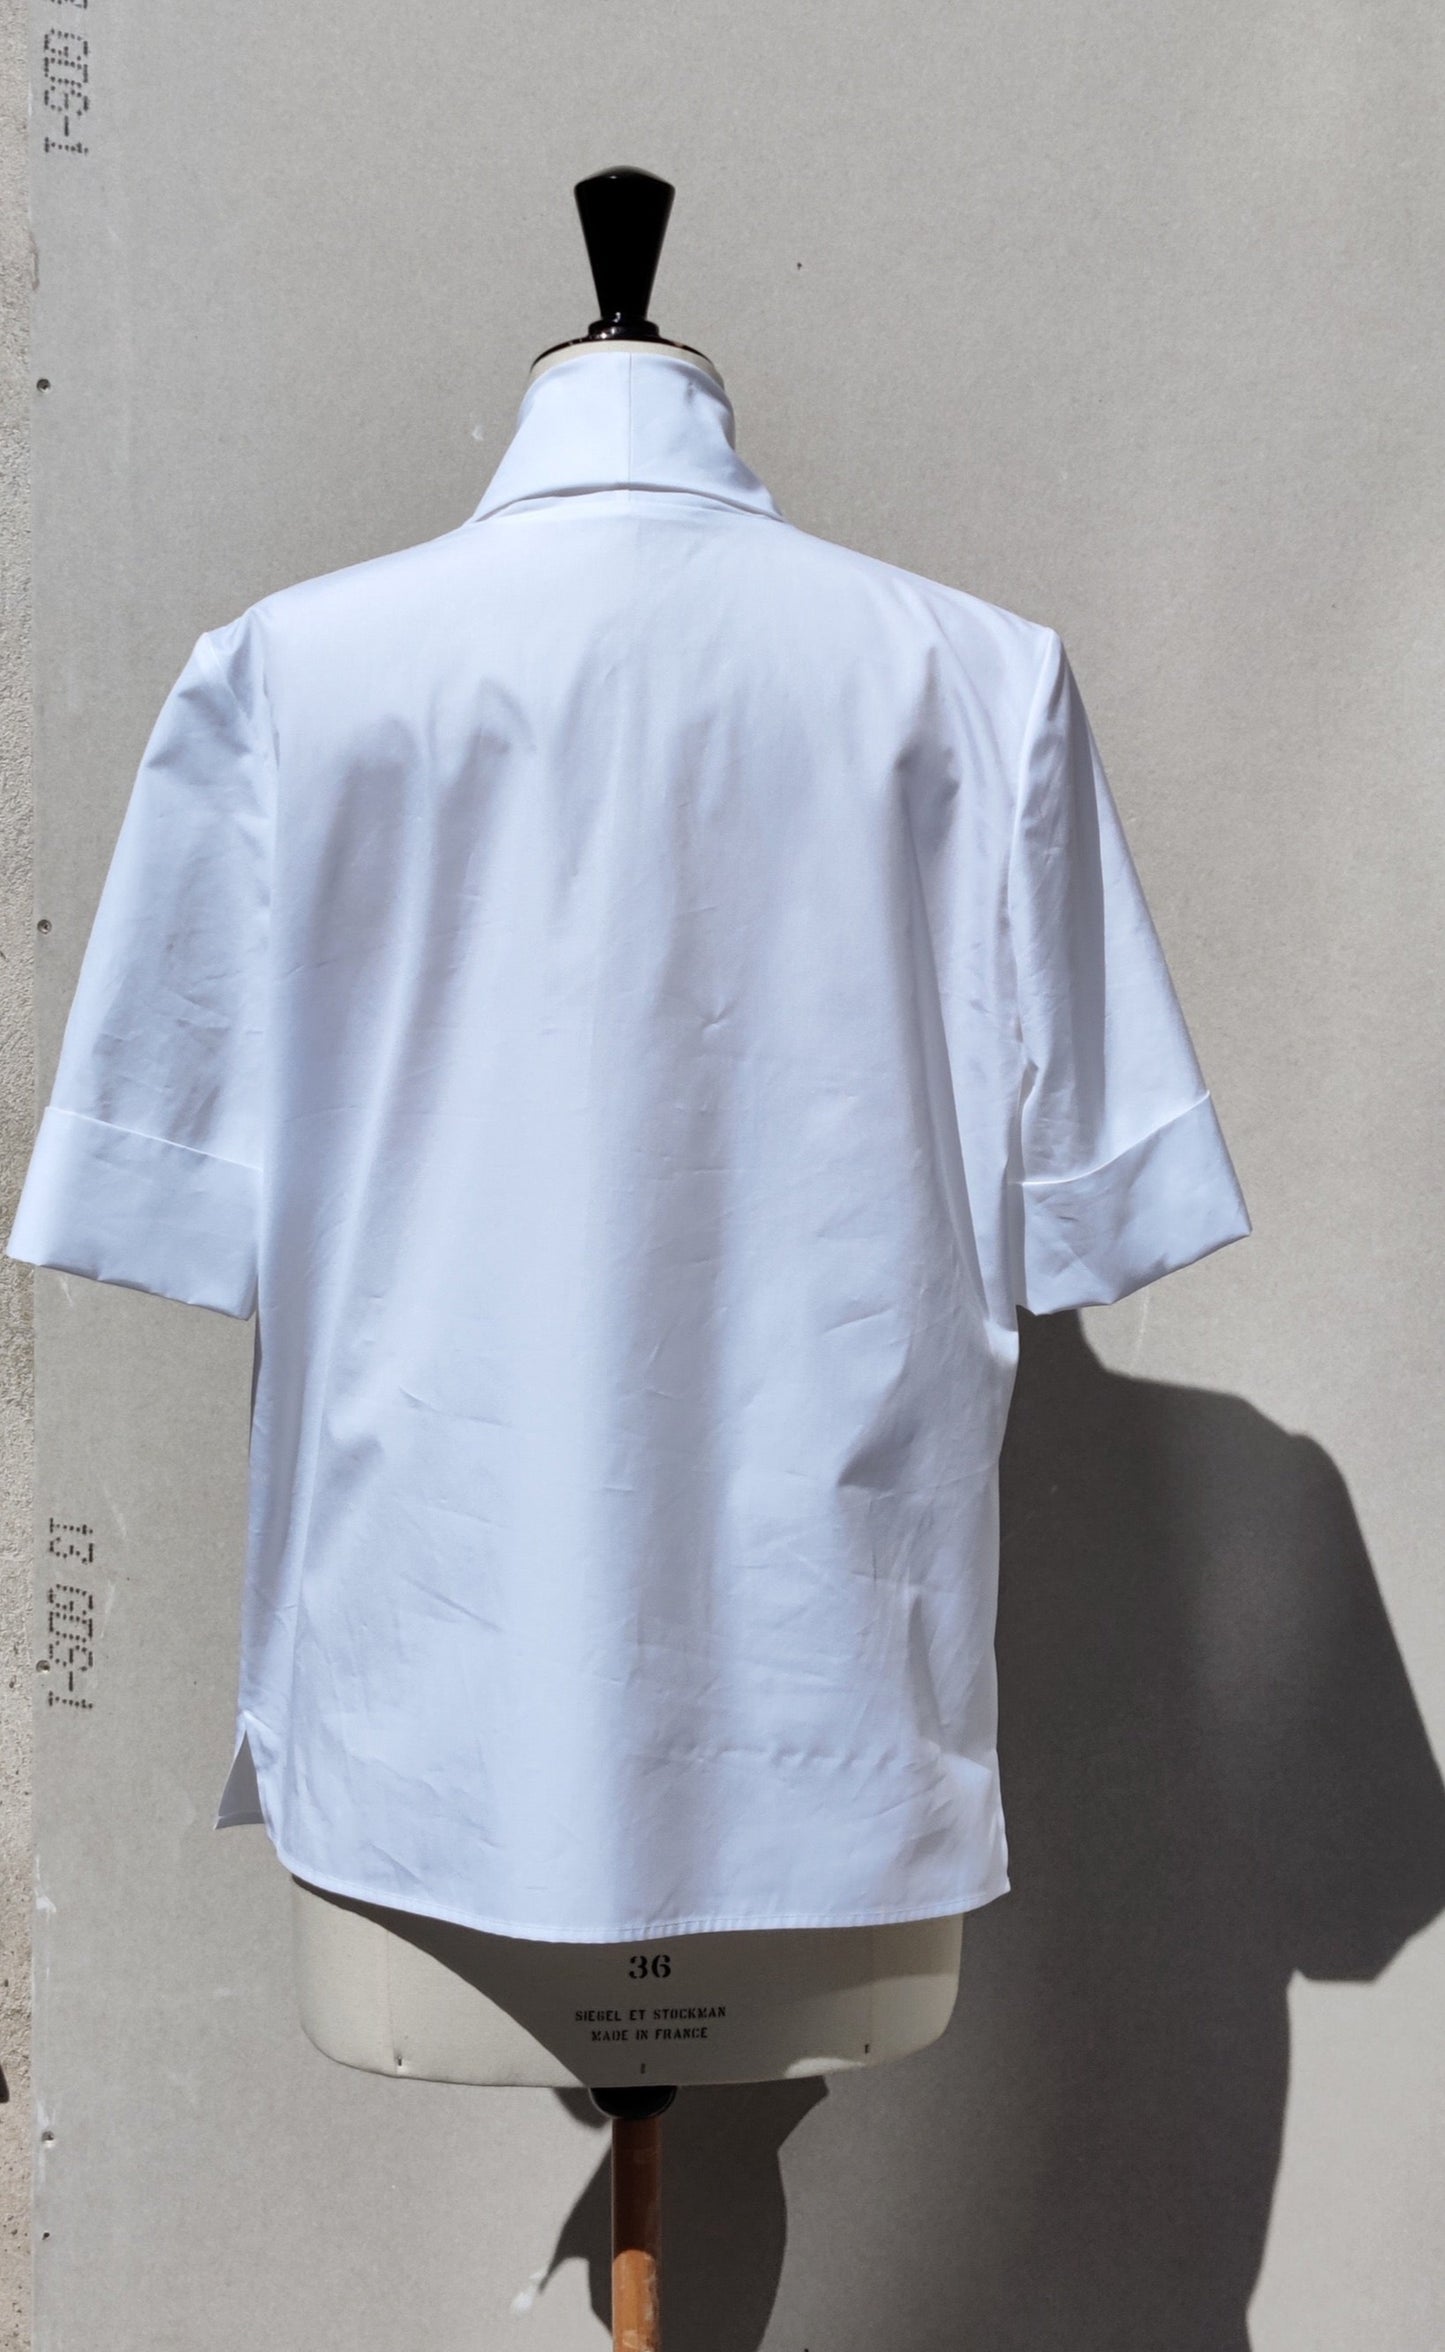 Back view Abba shirt white on a dummy against a grey wall.